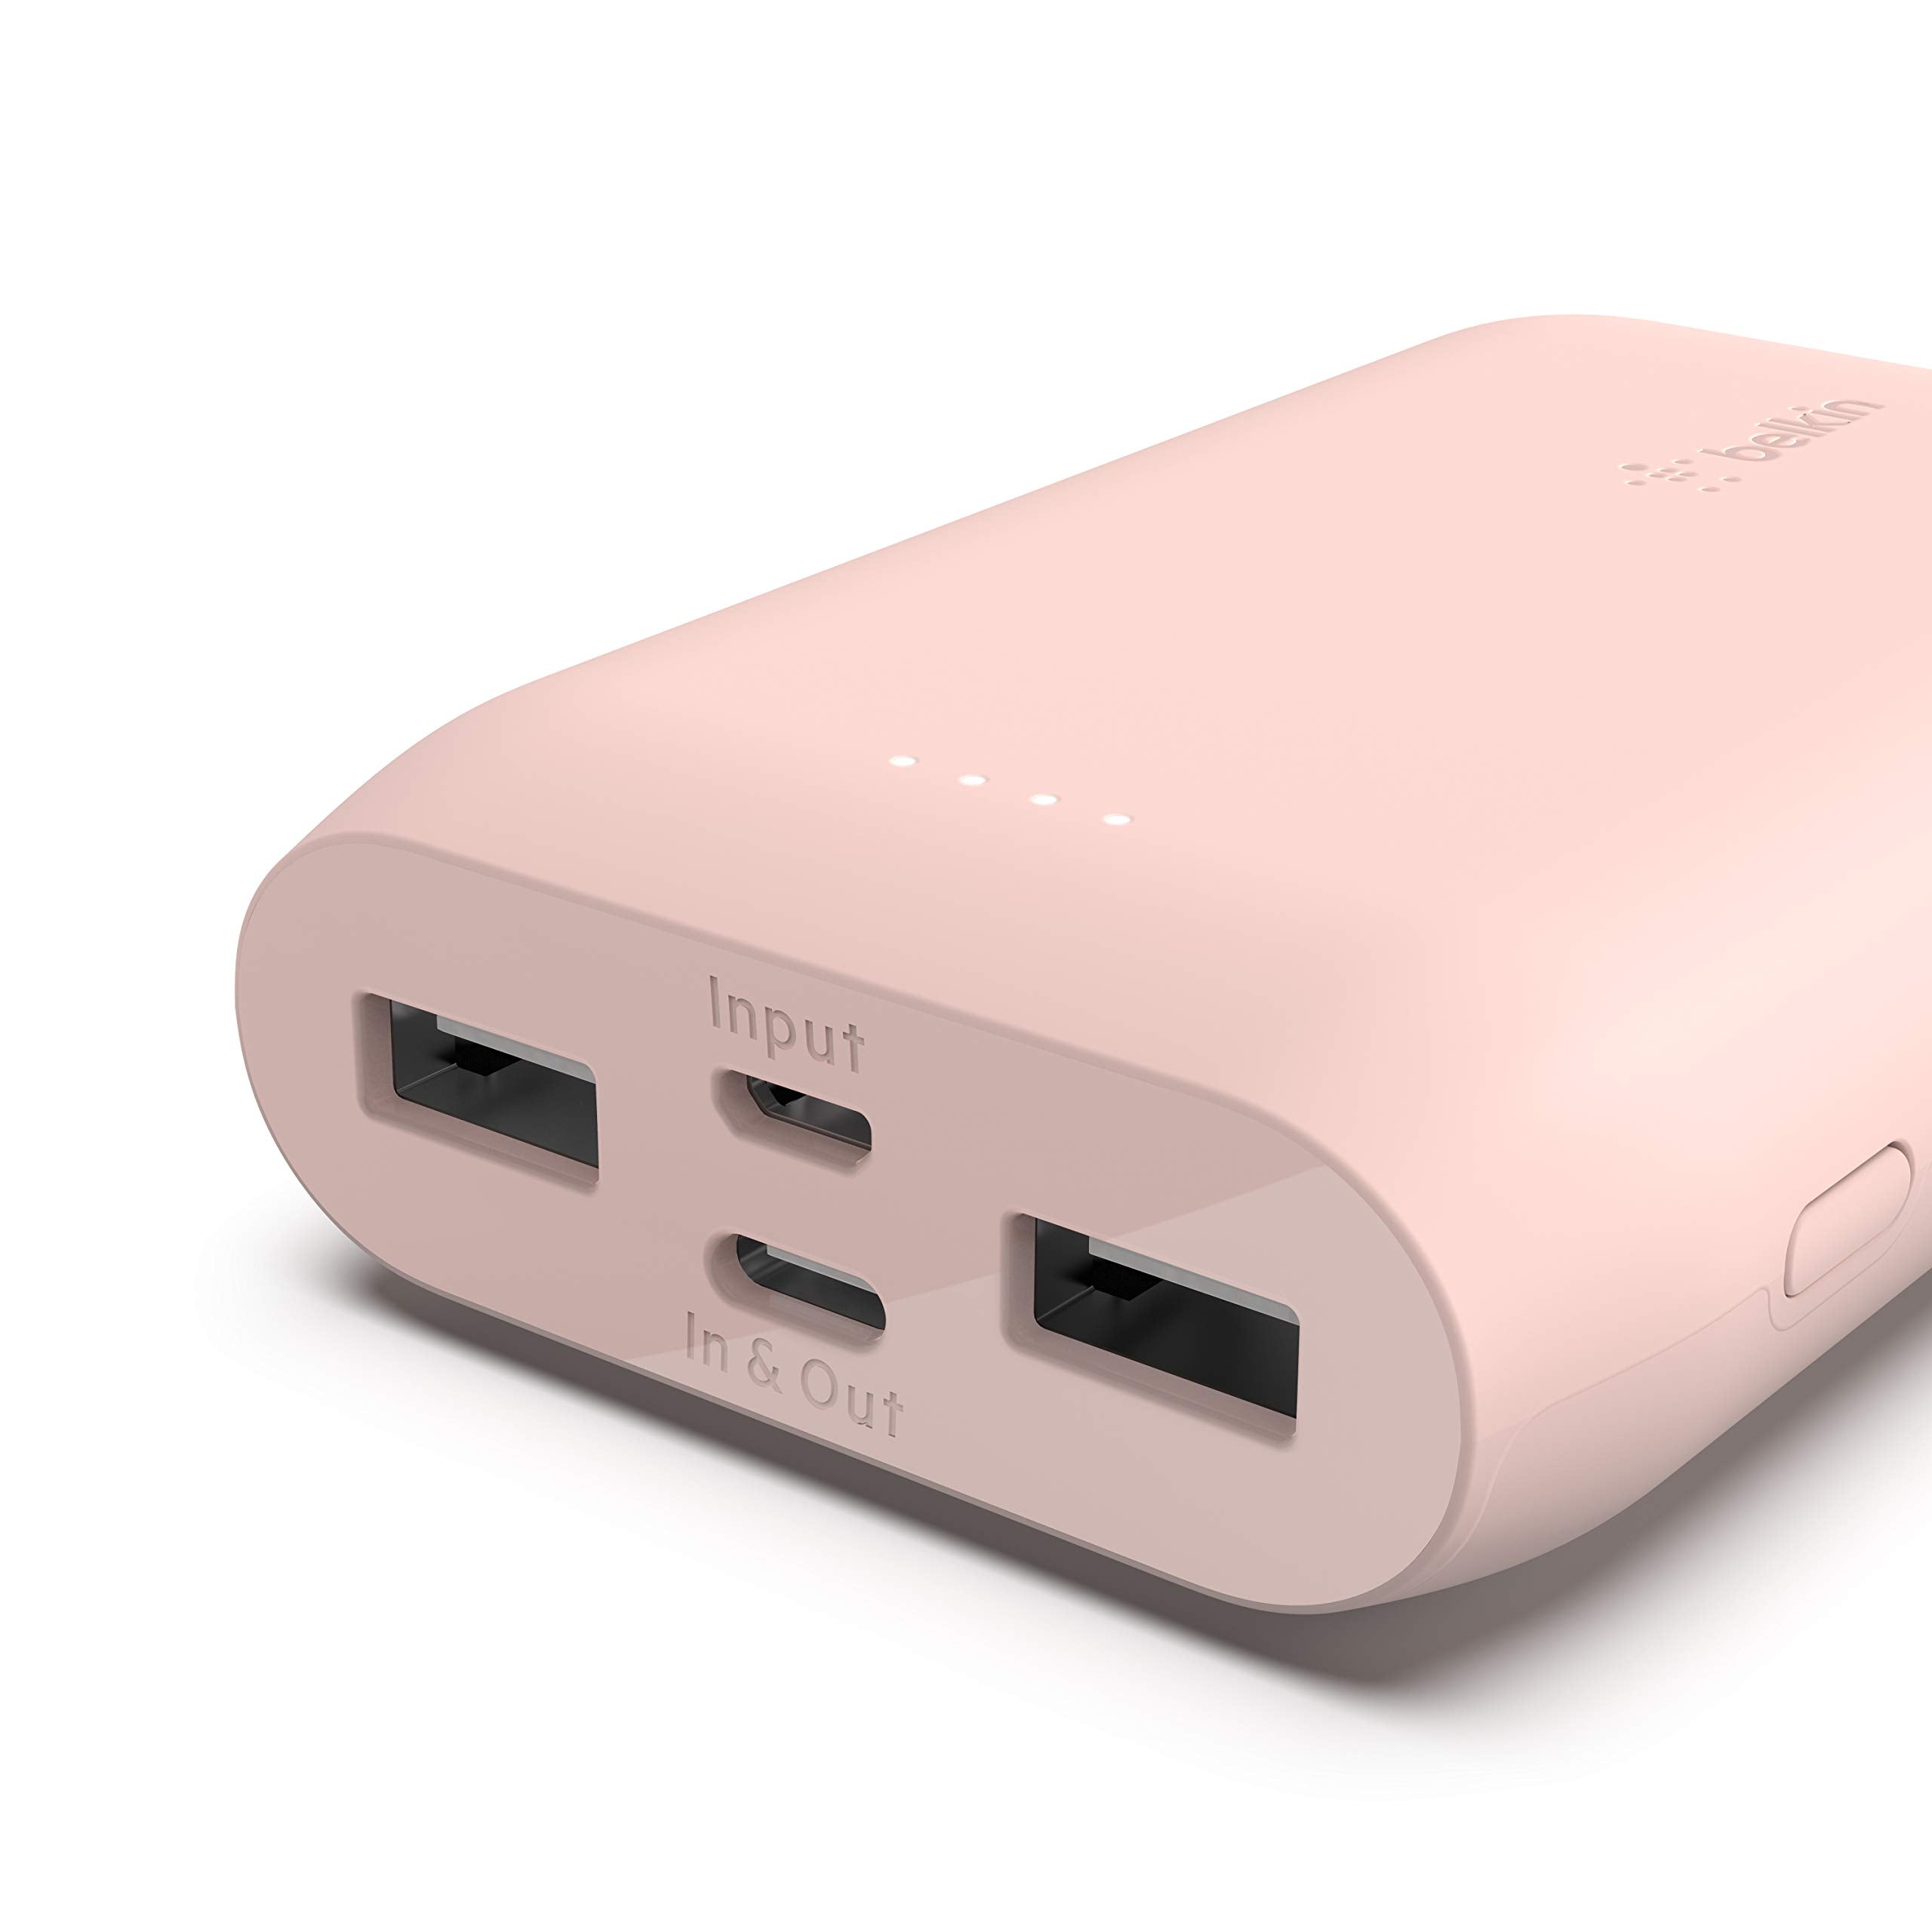 Belkin Portable Power Bank Charger 10K (Portable Charger Battery Pack w/ USB-C + Dual USB Ports, 10000mAh Capacity, for iPhone, AirPods, iPad, Galaxy S22 and more) – Rose Gold